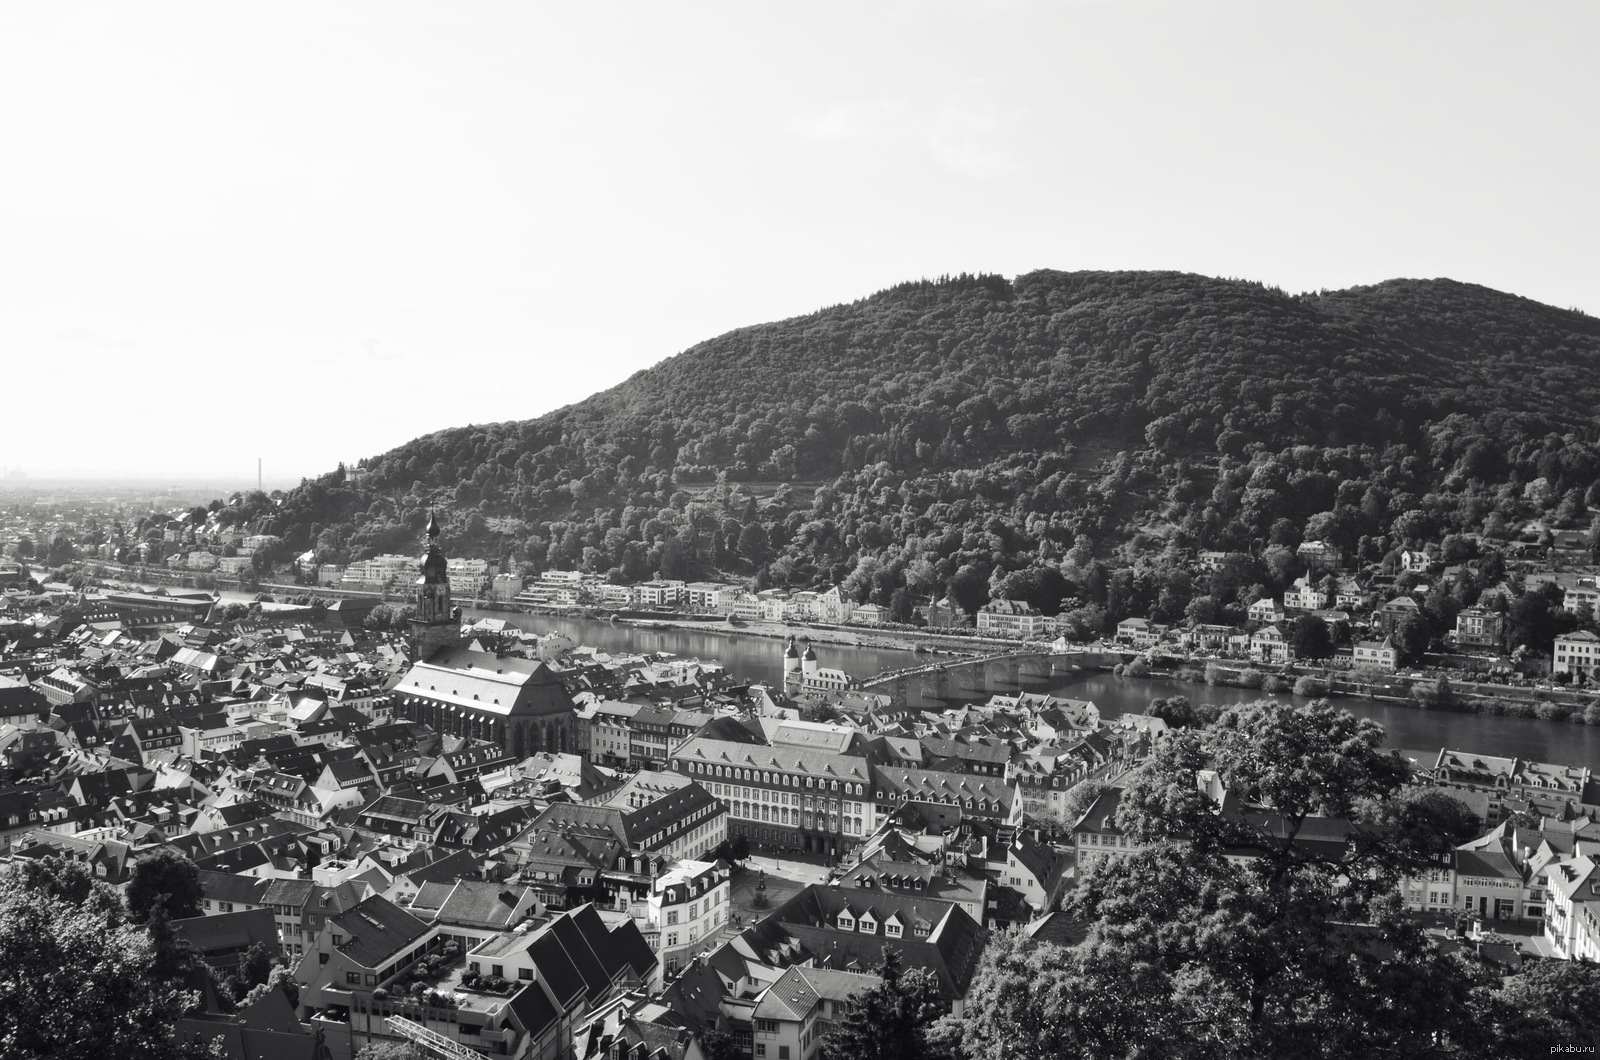 some more germany - My, Germany, Town, The photo, Black and white